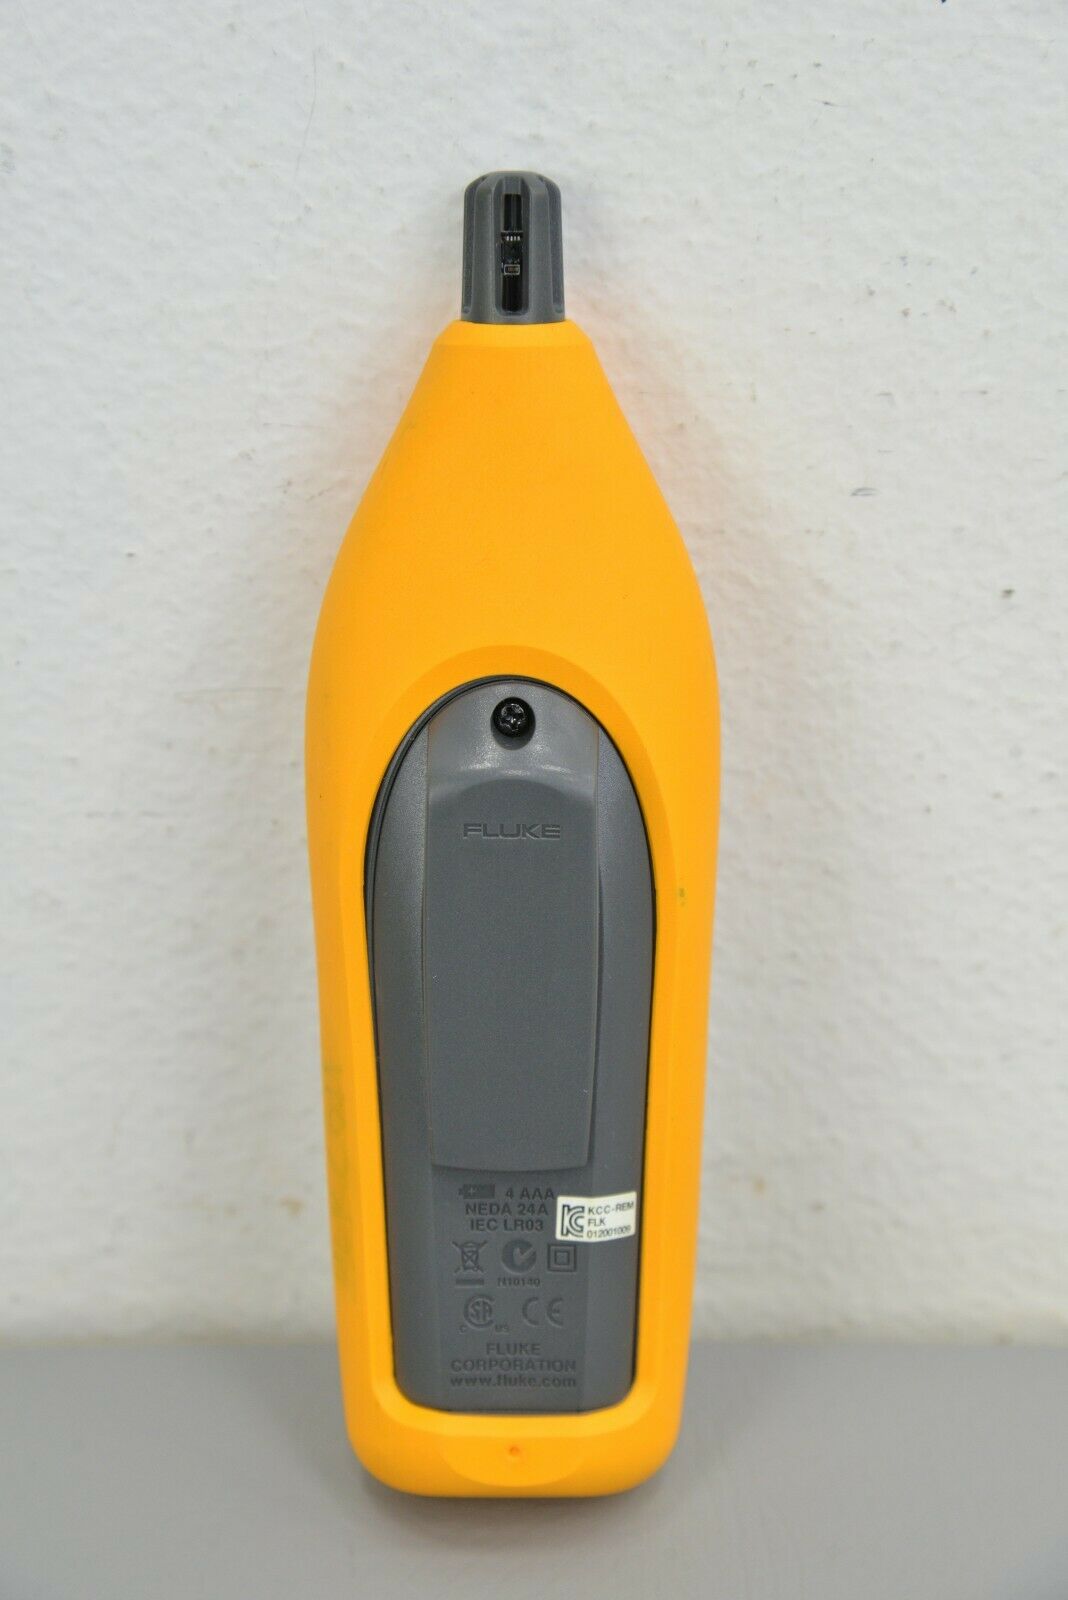 https://www.rhinotradellc.com/wp-content/uploads/imported/3/Fluke-971-Temperature-Humidity-Meter-w-Protective-Cover-24688-184583238733-2.JPG